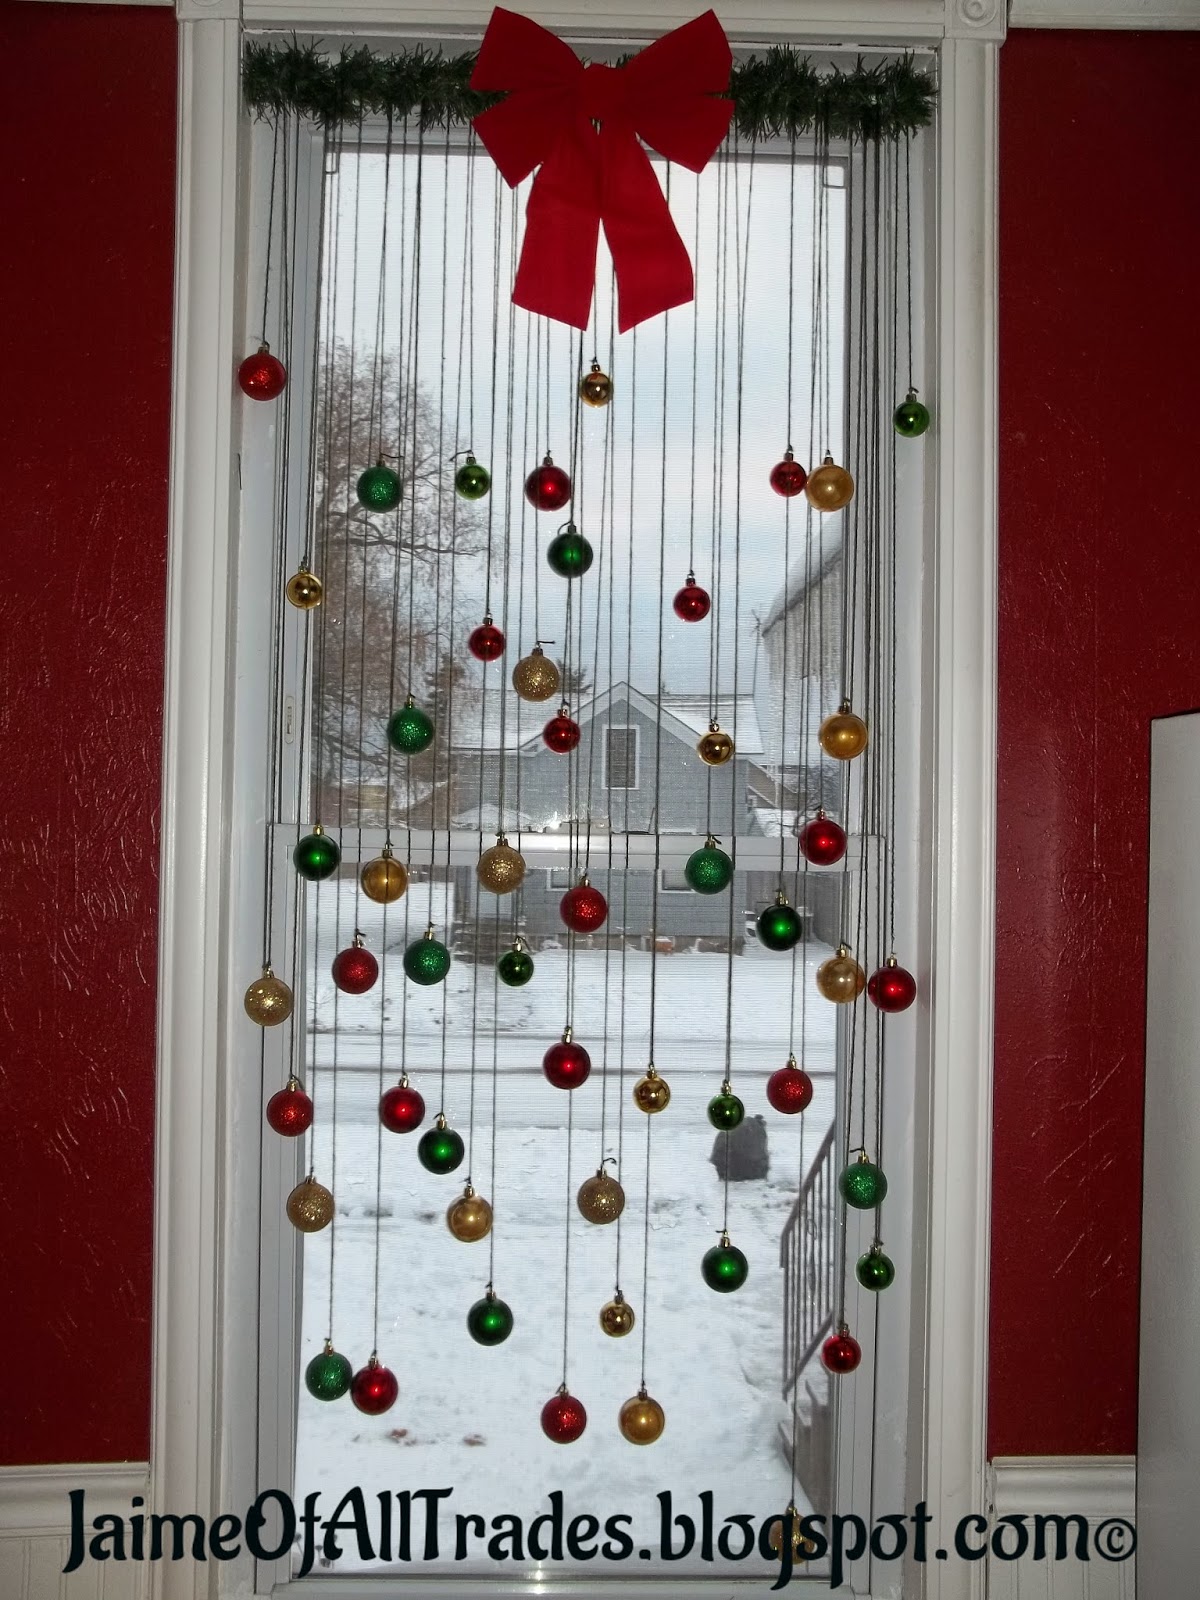 Hang Some Christmas Ornaments Into the Window